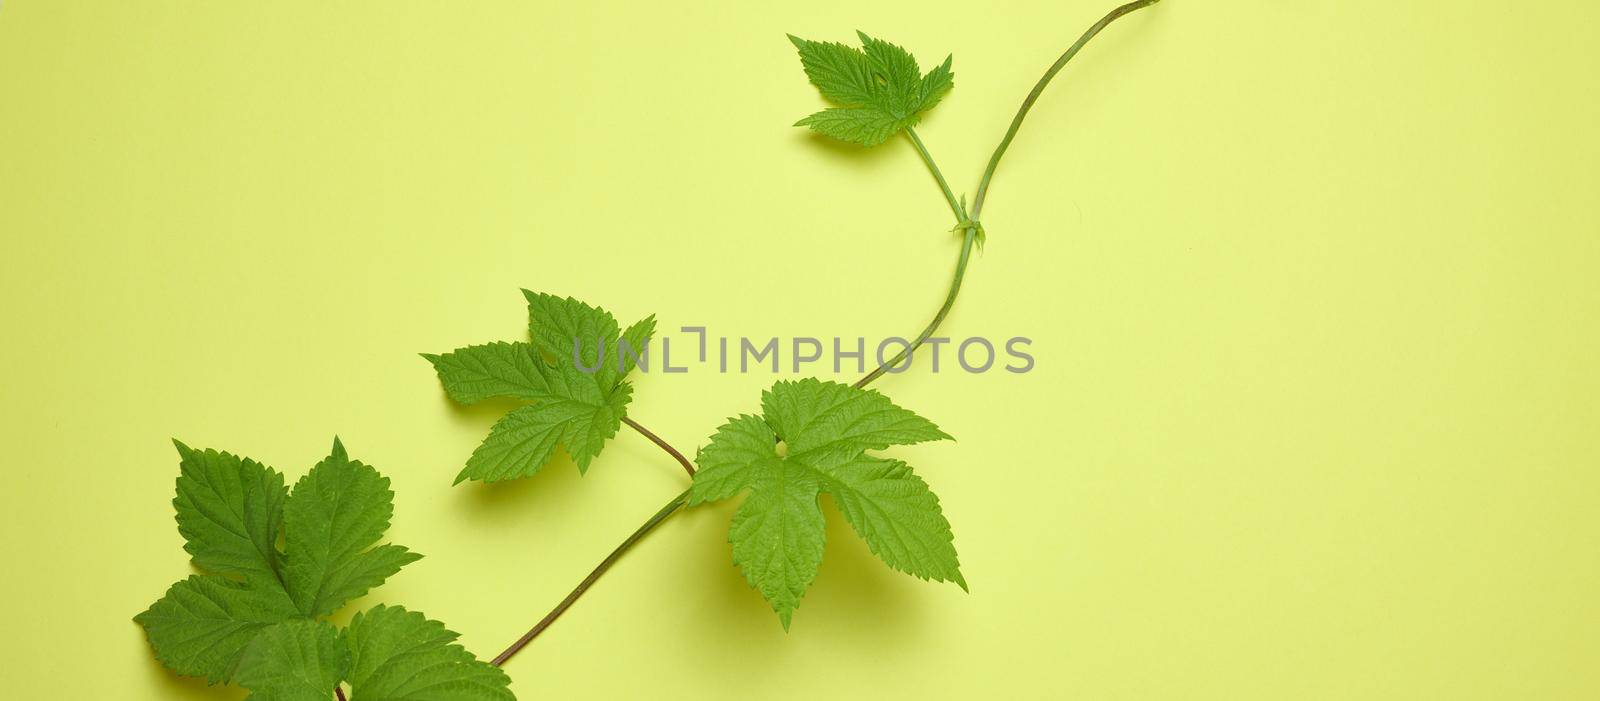 Branch of wild grapes with green leaves on a green paper background